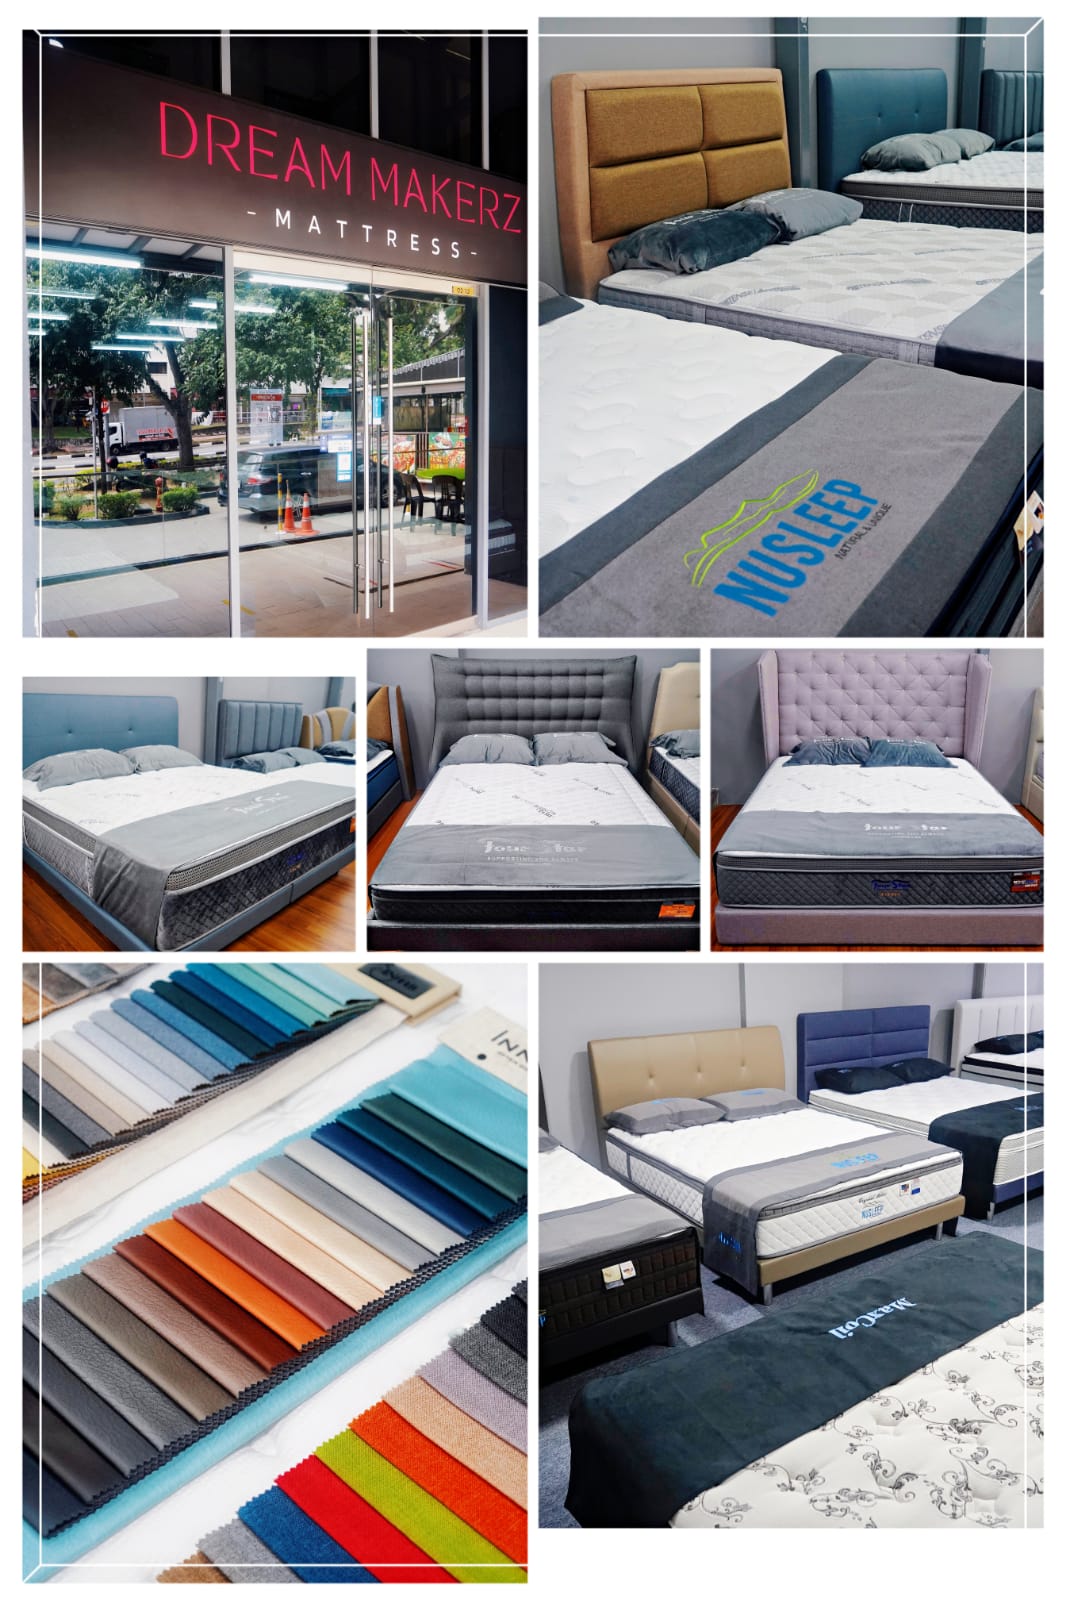 Lobang: Up to 70% off mattresses at Mattress Store in Chai Chee from 23 Jun - 3 July 2022; Queen-sized mattress from S$399 - 3